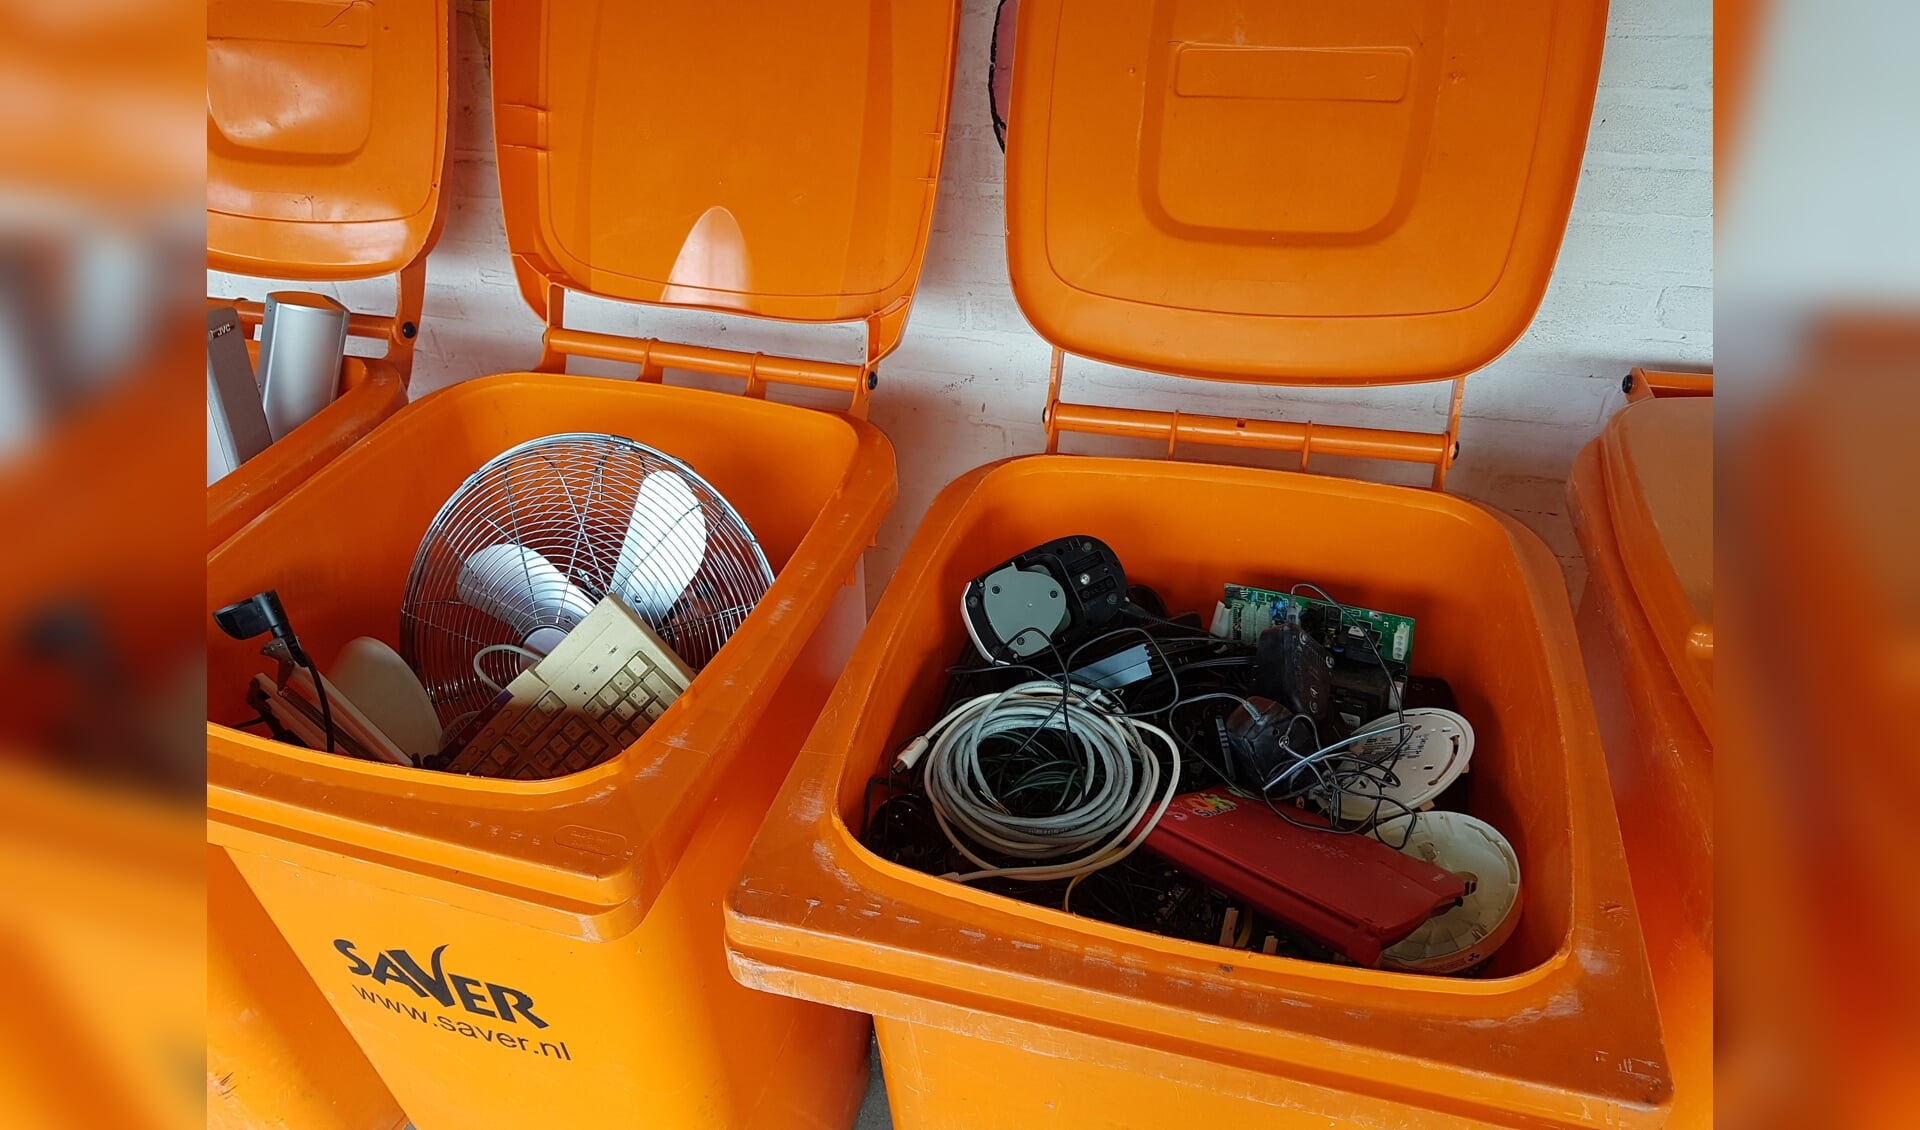 Volle e-waste containers